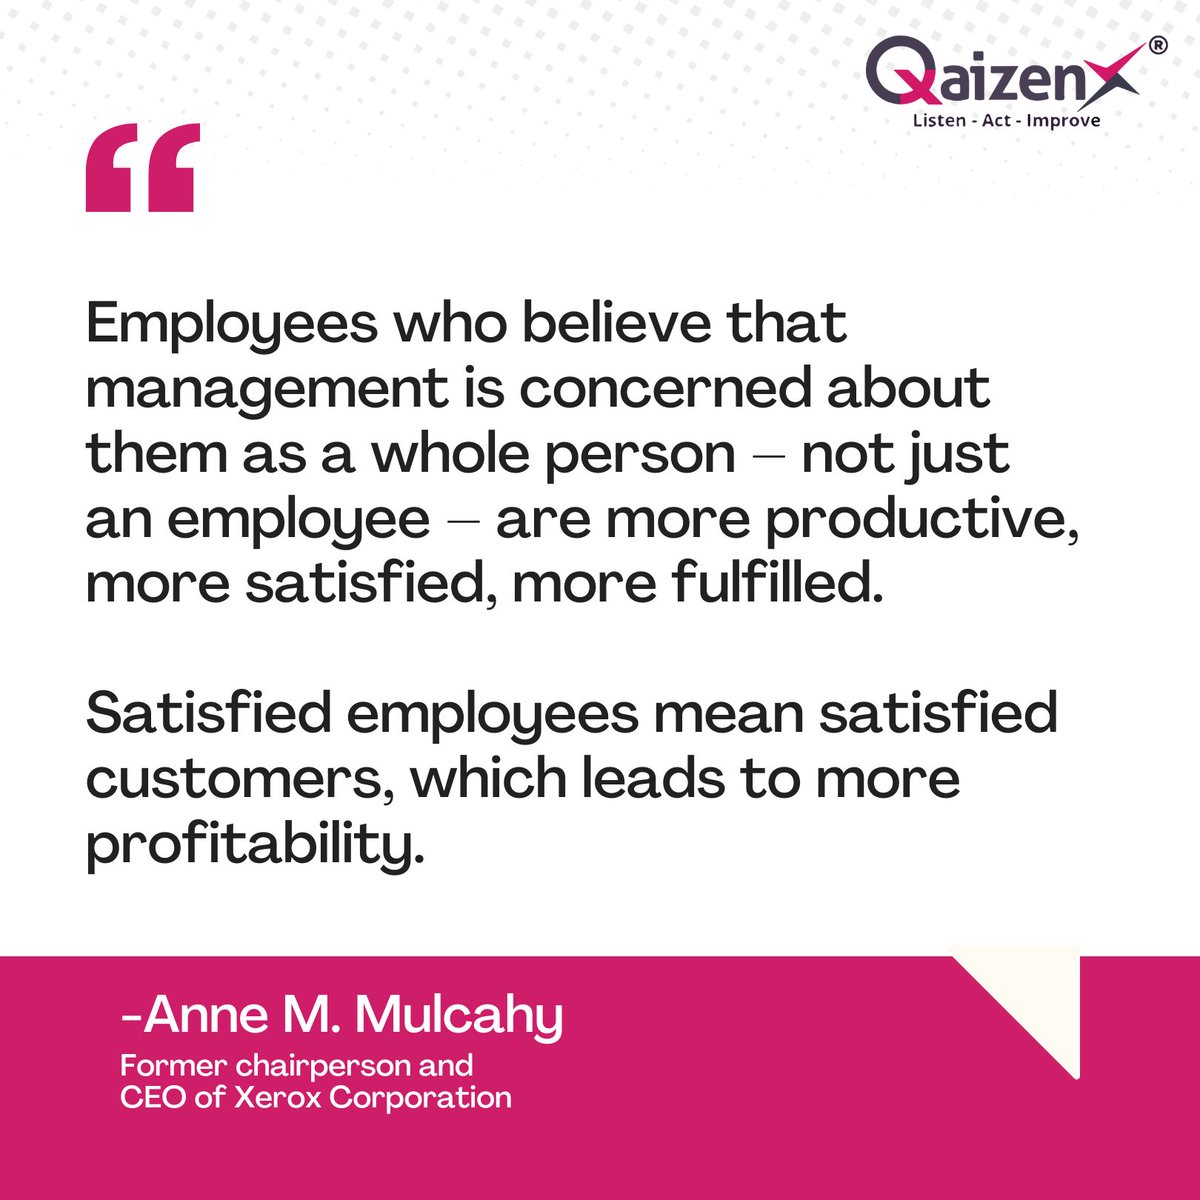 Happy employees = happy customers = thriving bottom line! 

Investing in your team's well-being isn't just good ethics, it's good business. When employees feel valued as whole individuals, magic happens!

#EmployeeEngagement #CompanyCulture #EmployeeExperience #QaizenX